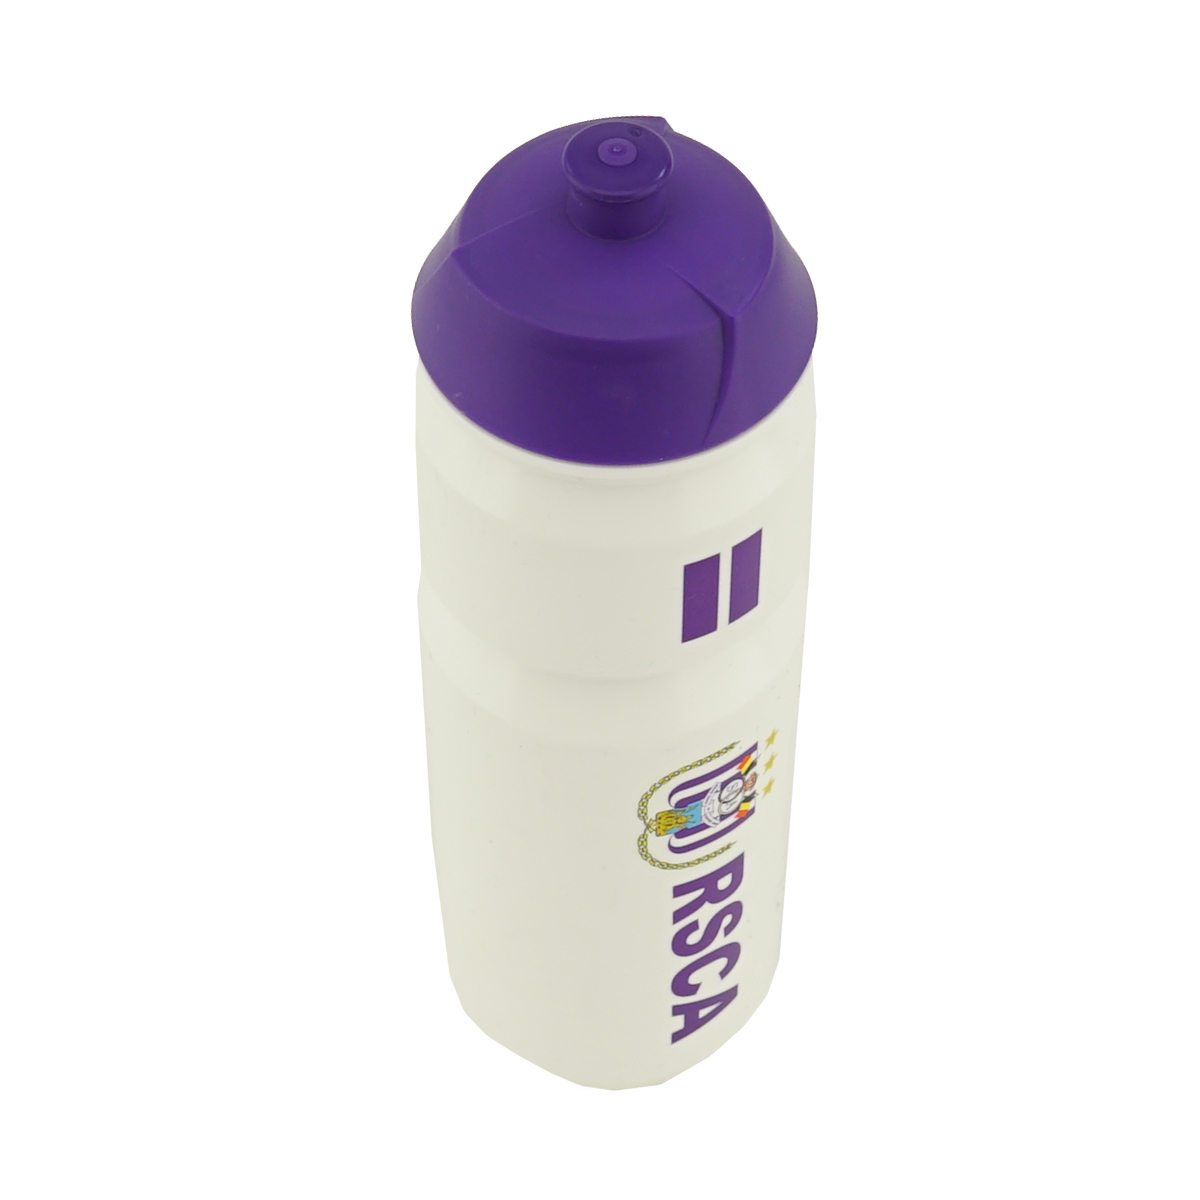 RSCA Drinking Bottle is-hover